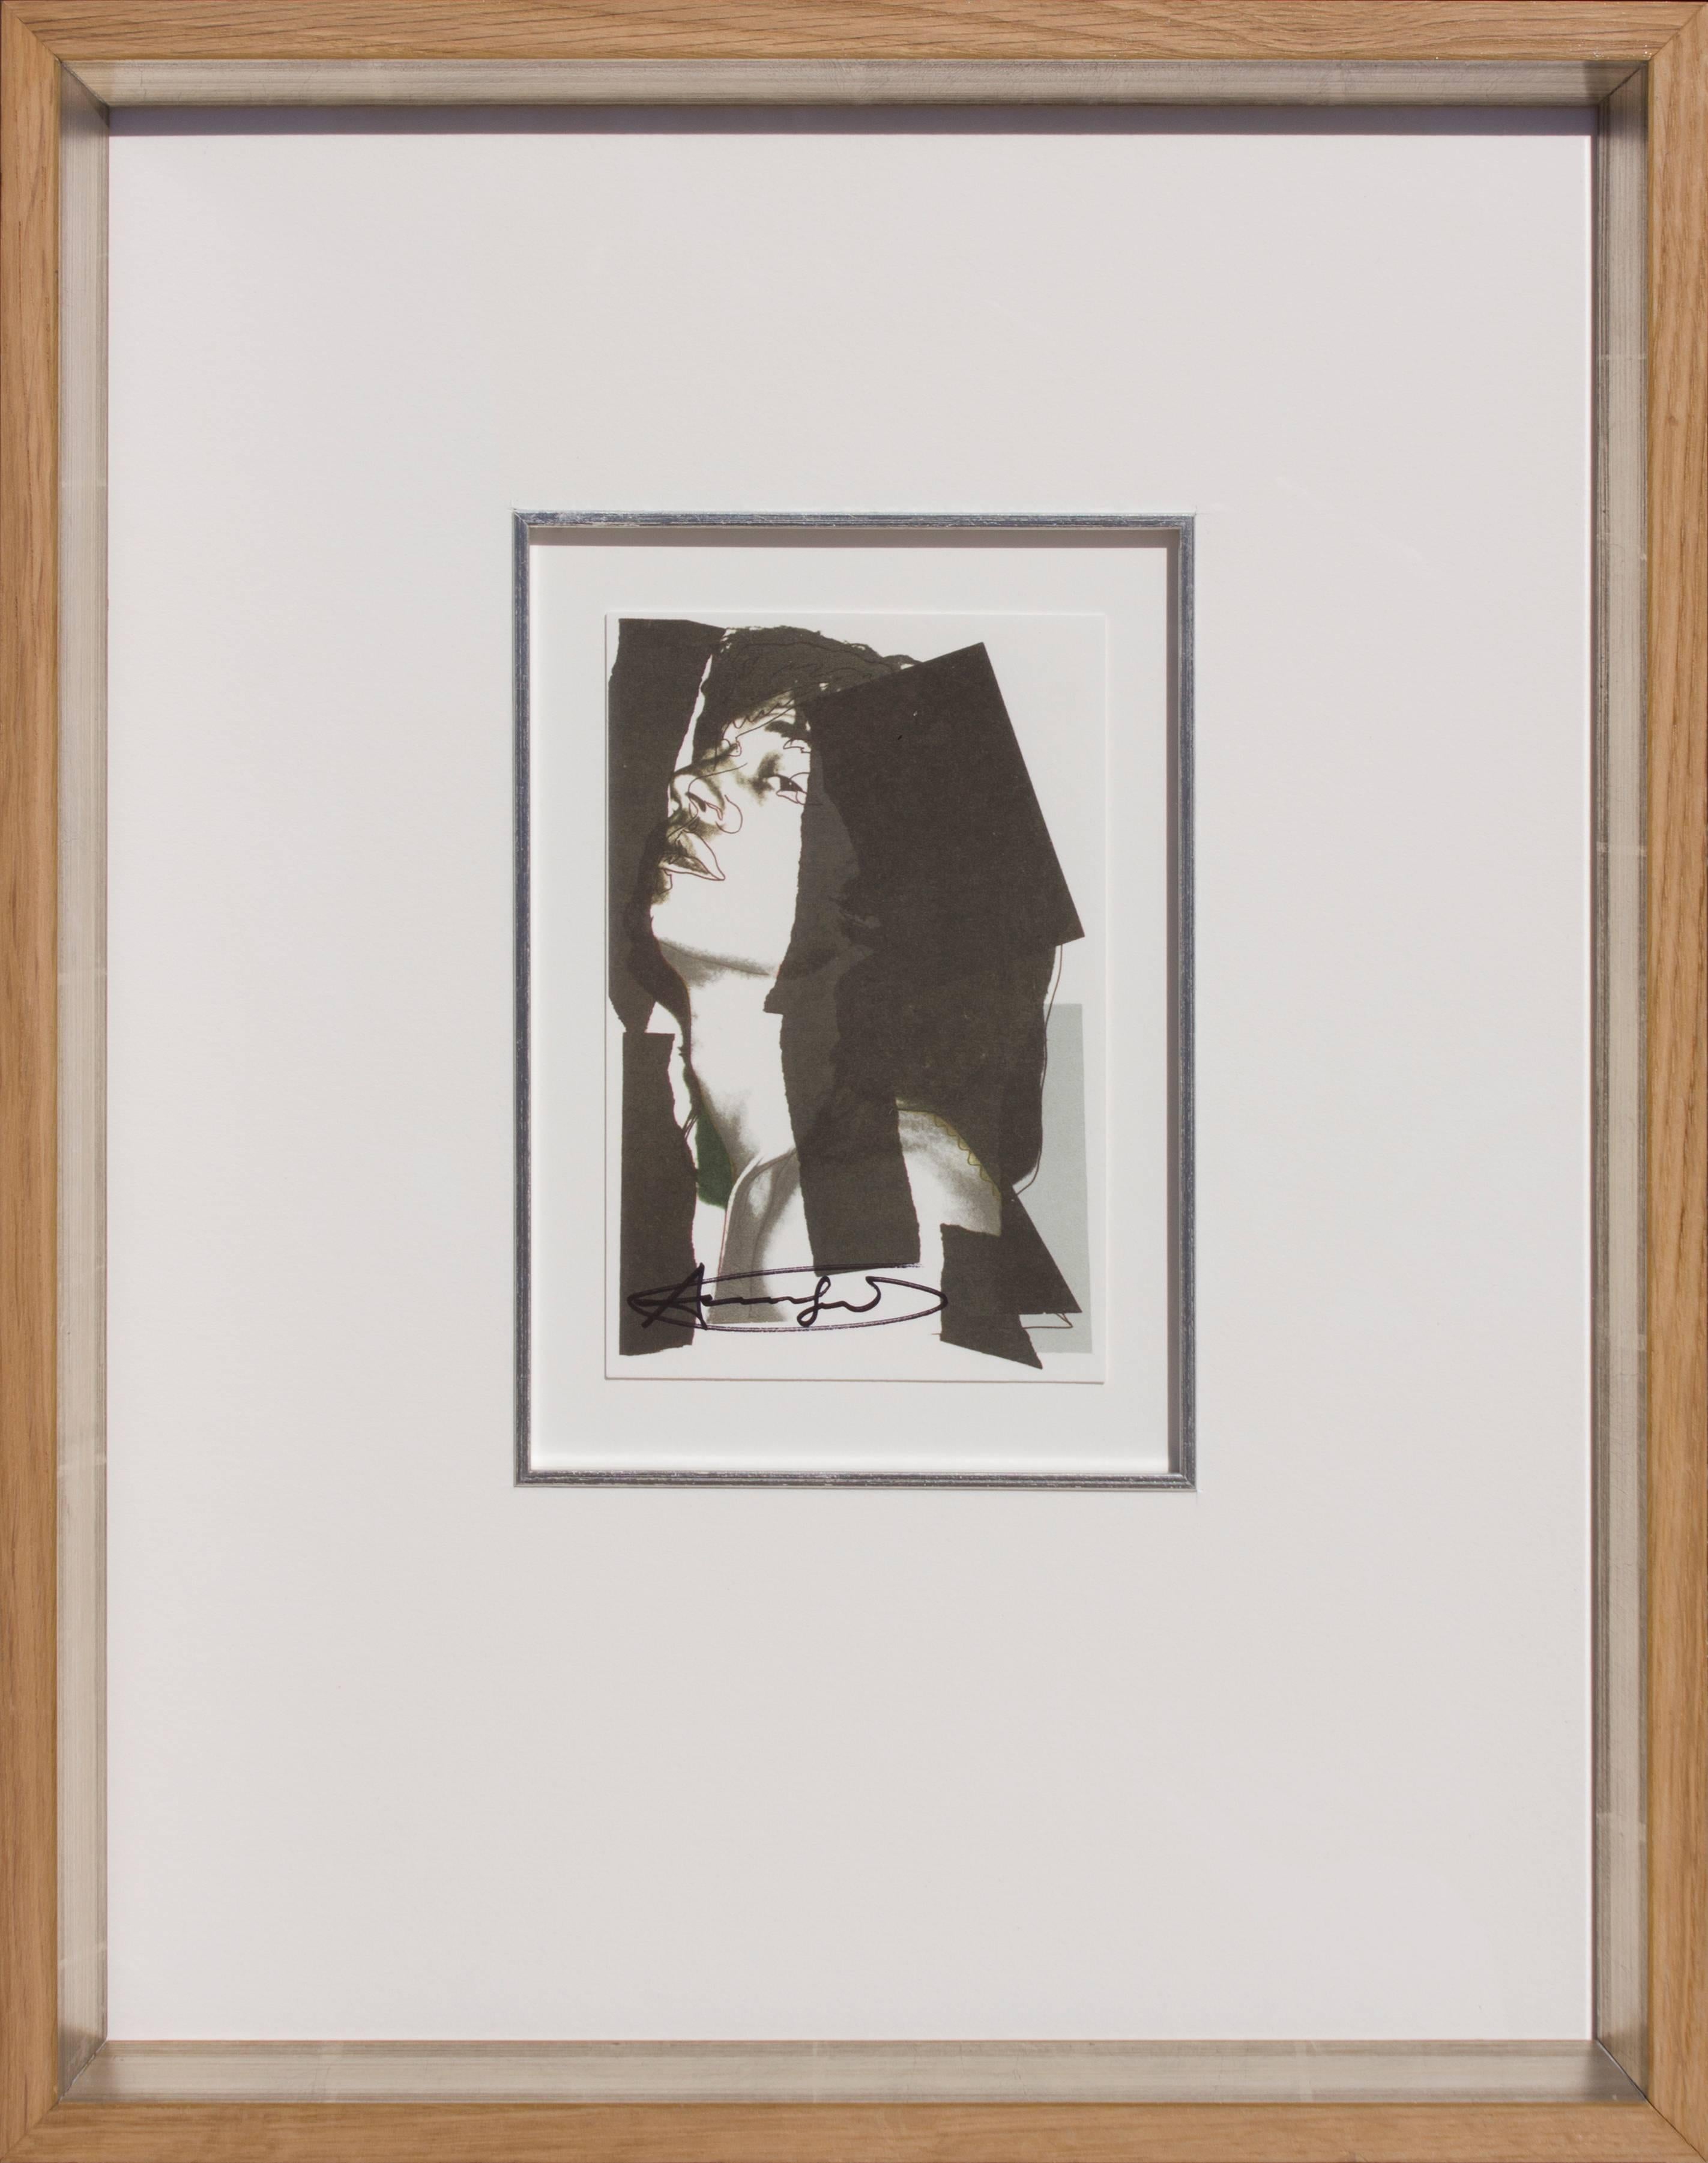 Mick Jagger Announcement Card, 1975 -10 - Print by (after) Andy Warhol